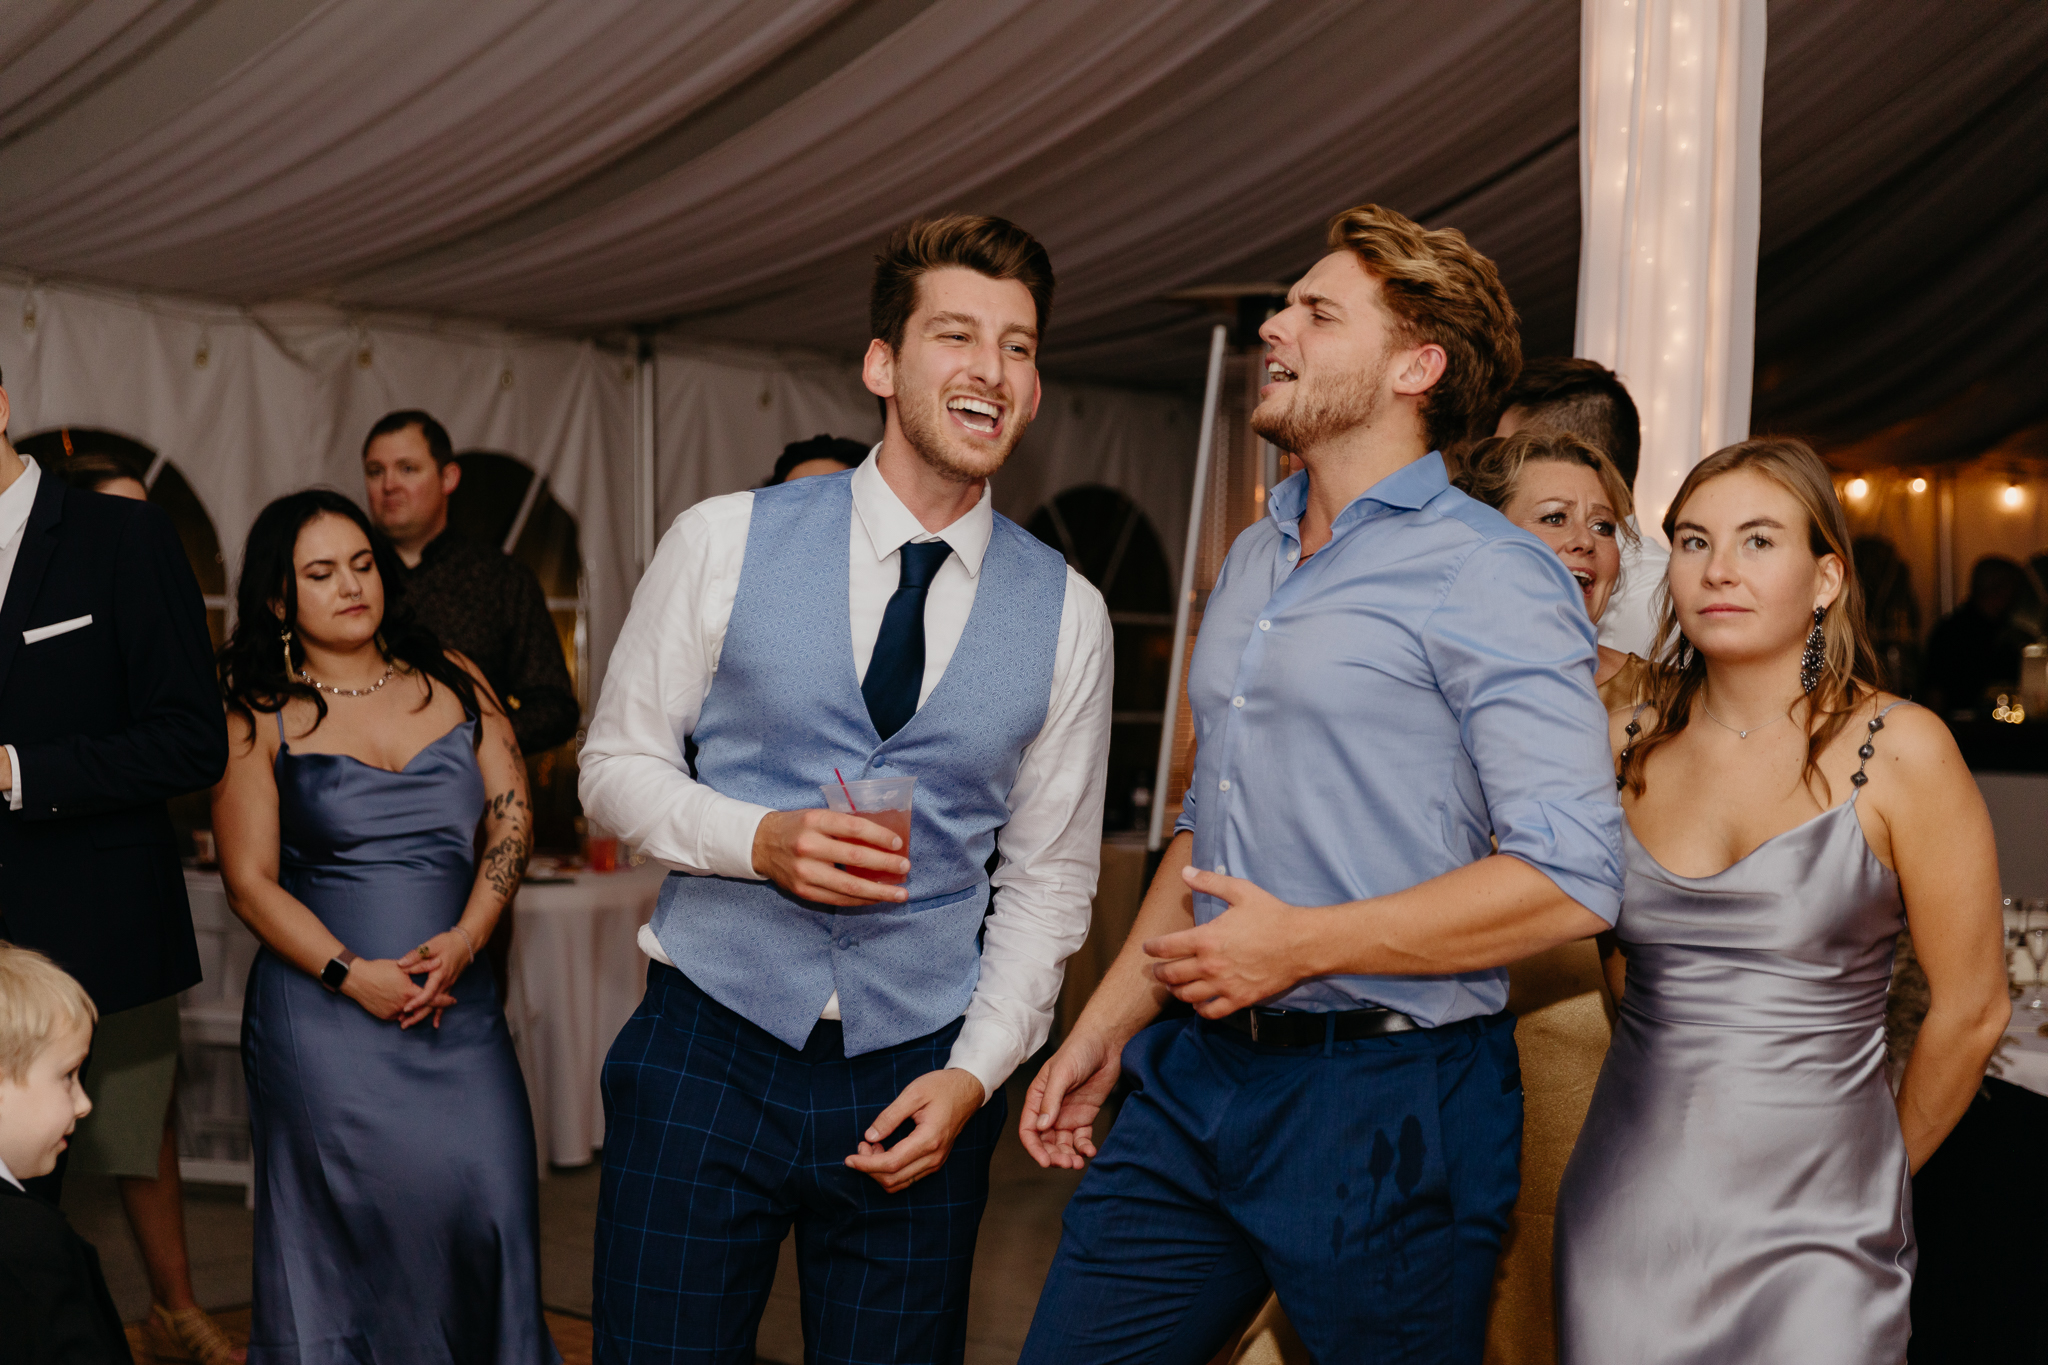 Wedding guests dancing and singing on the dancefloor together at a Northfork Farm Wedding